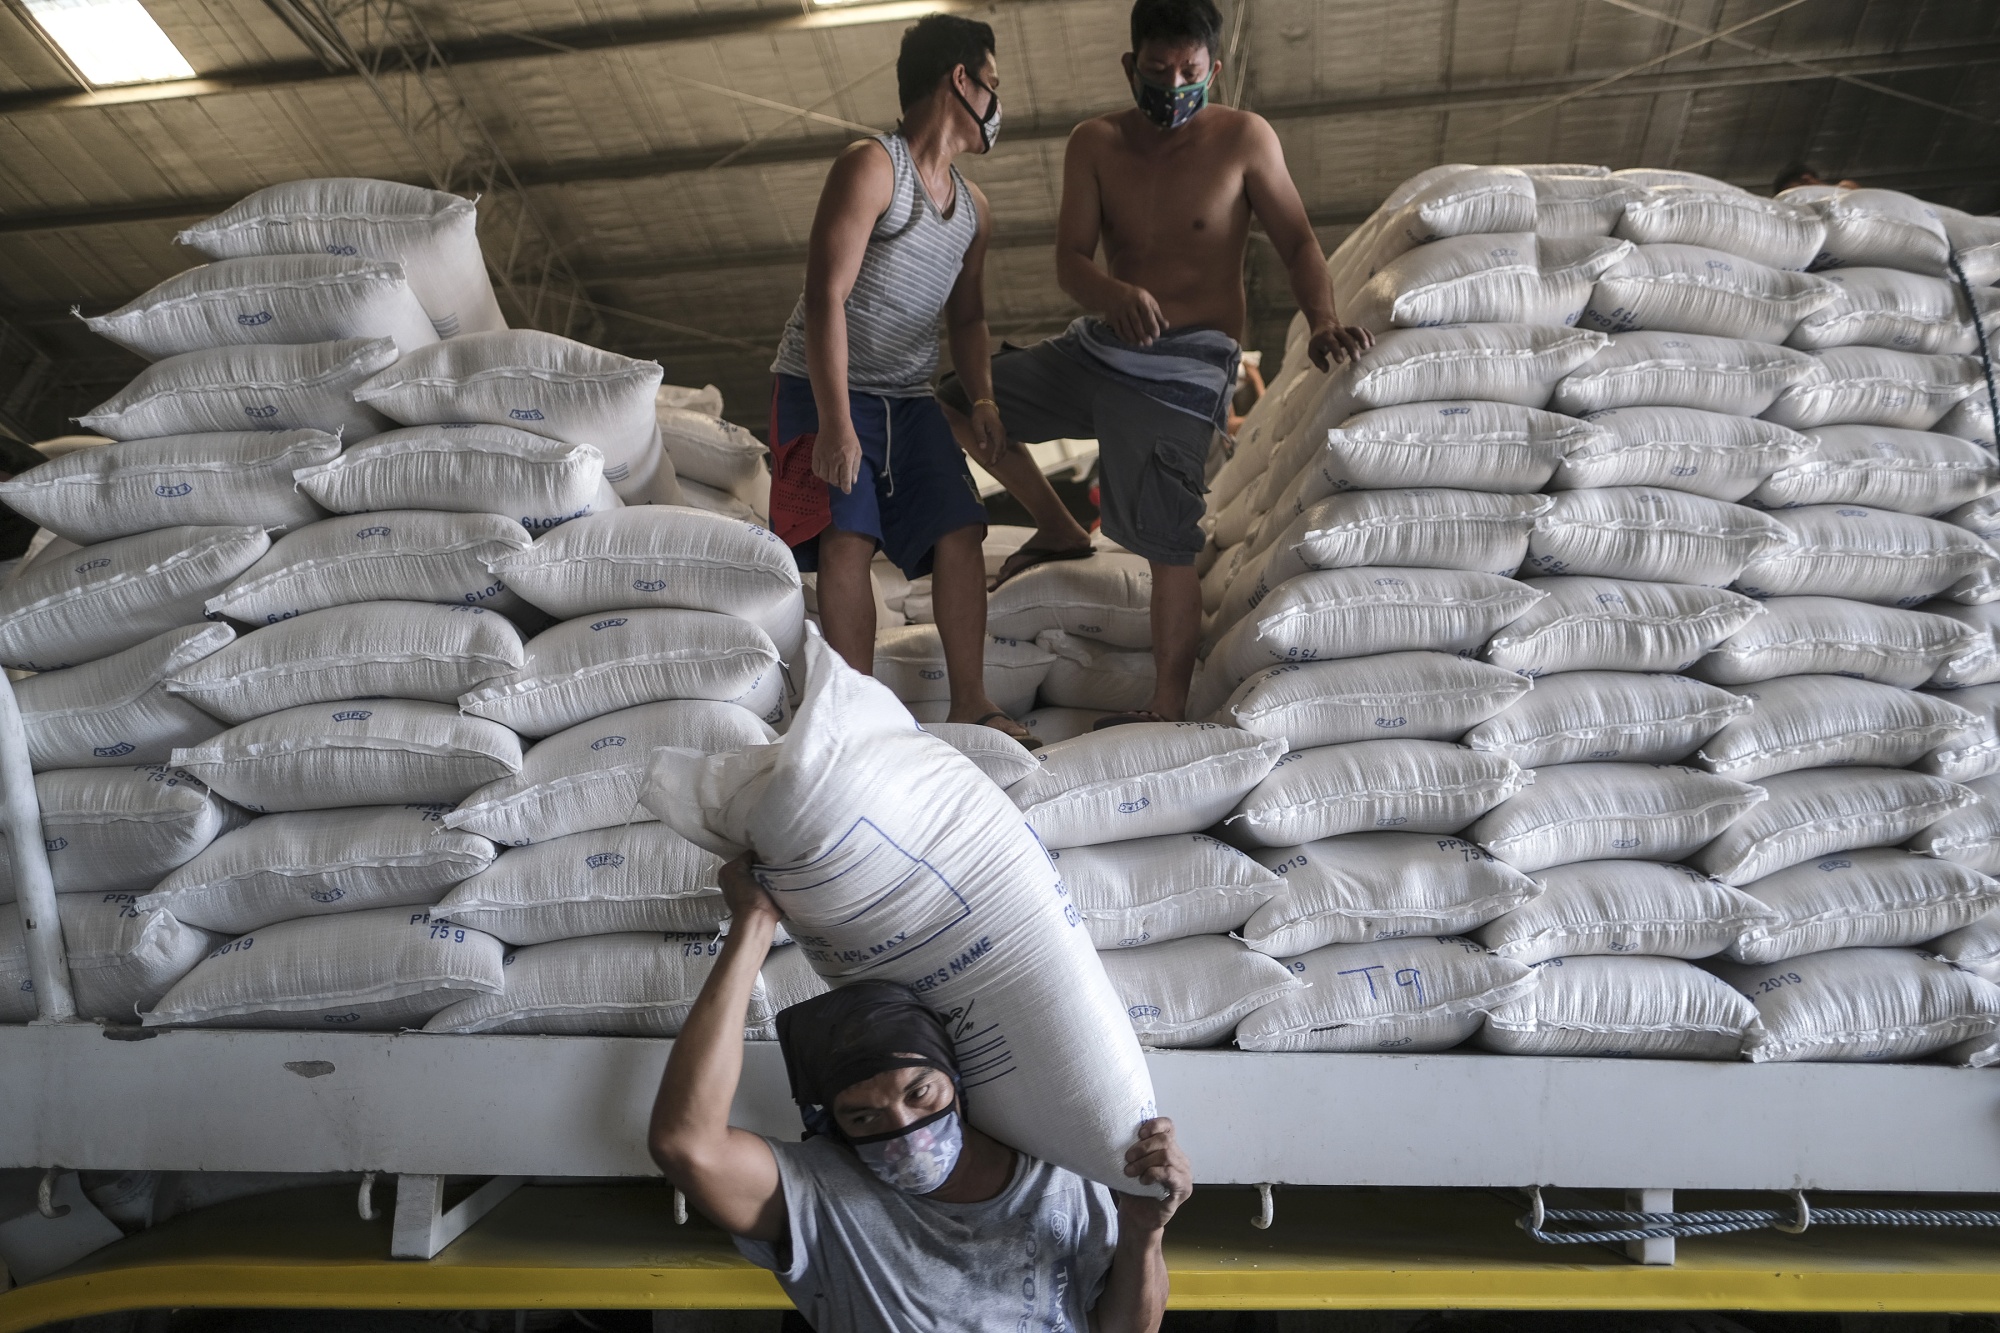 Thai workers prepare rice sacks to be sold at the Department of